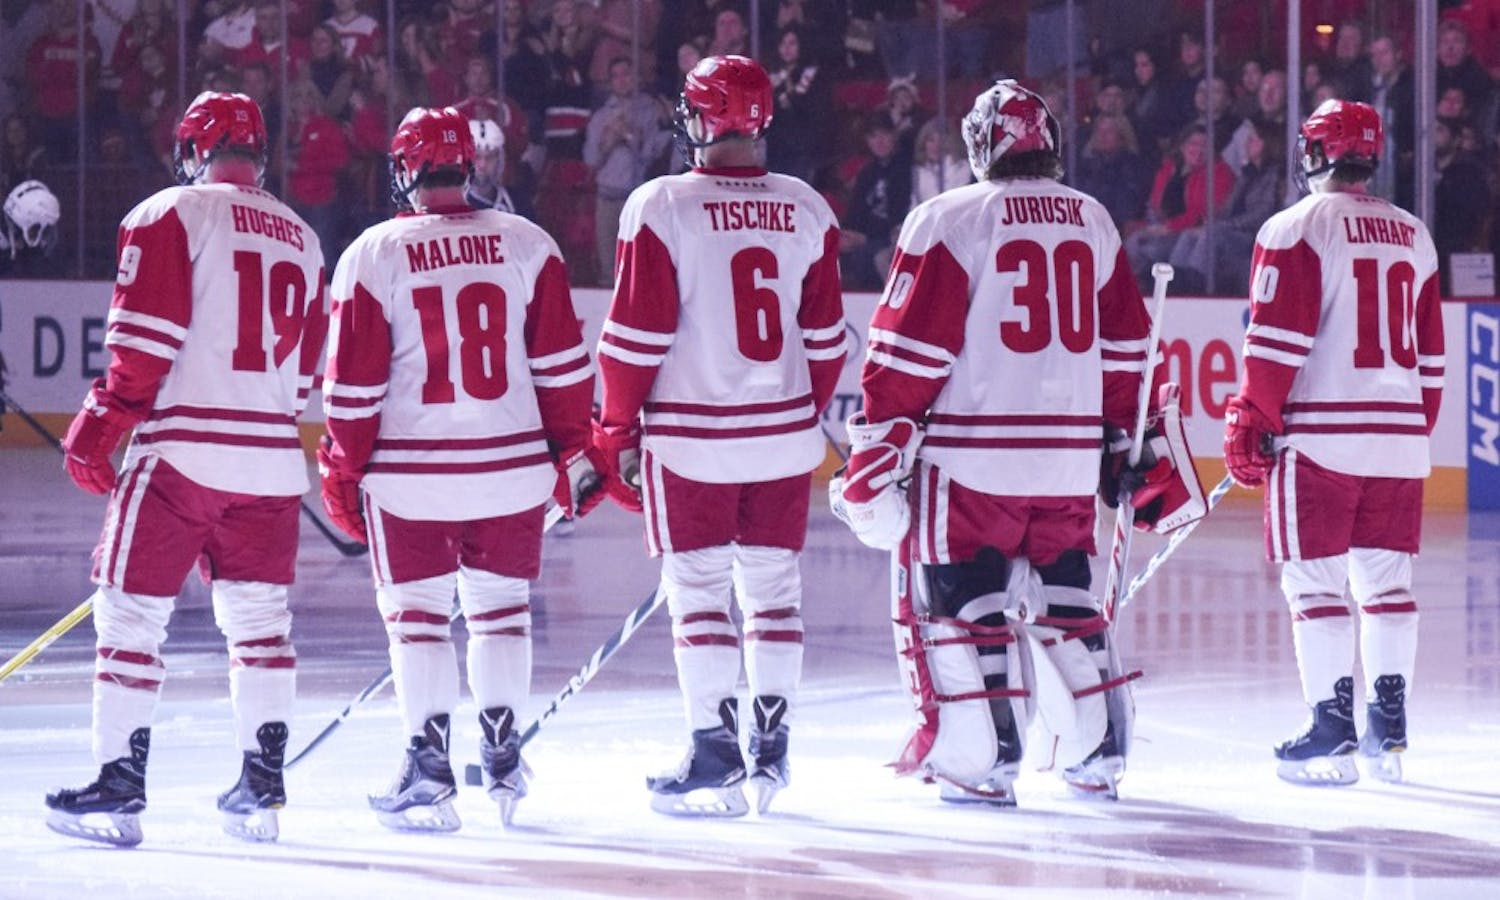 Senior&nbsp;Cameron&nbsp;Hughes and&nbsp;junior Seamus Malone struggled to muster many scoring chances in Wisconsin's 6-2 loss to Notre Dame.&nbsp;